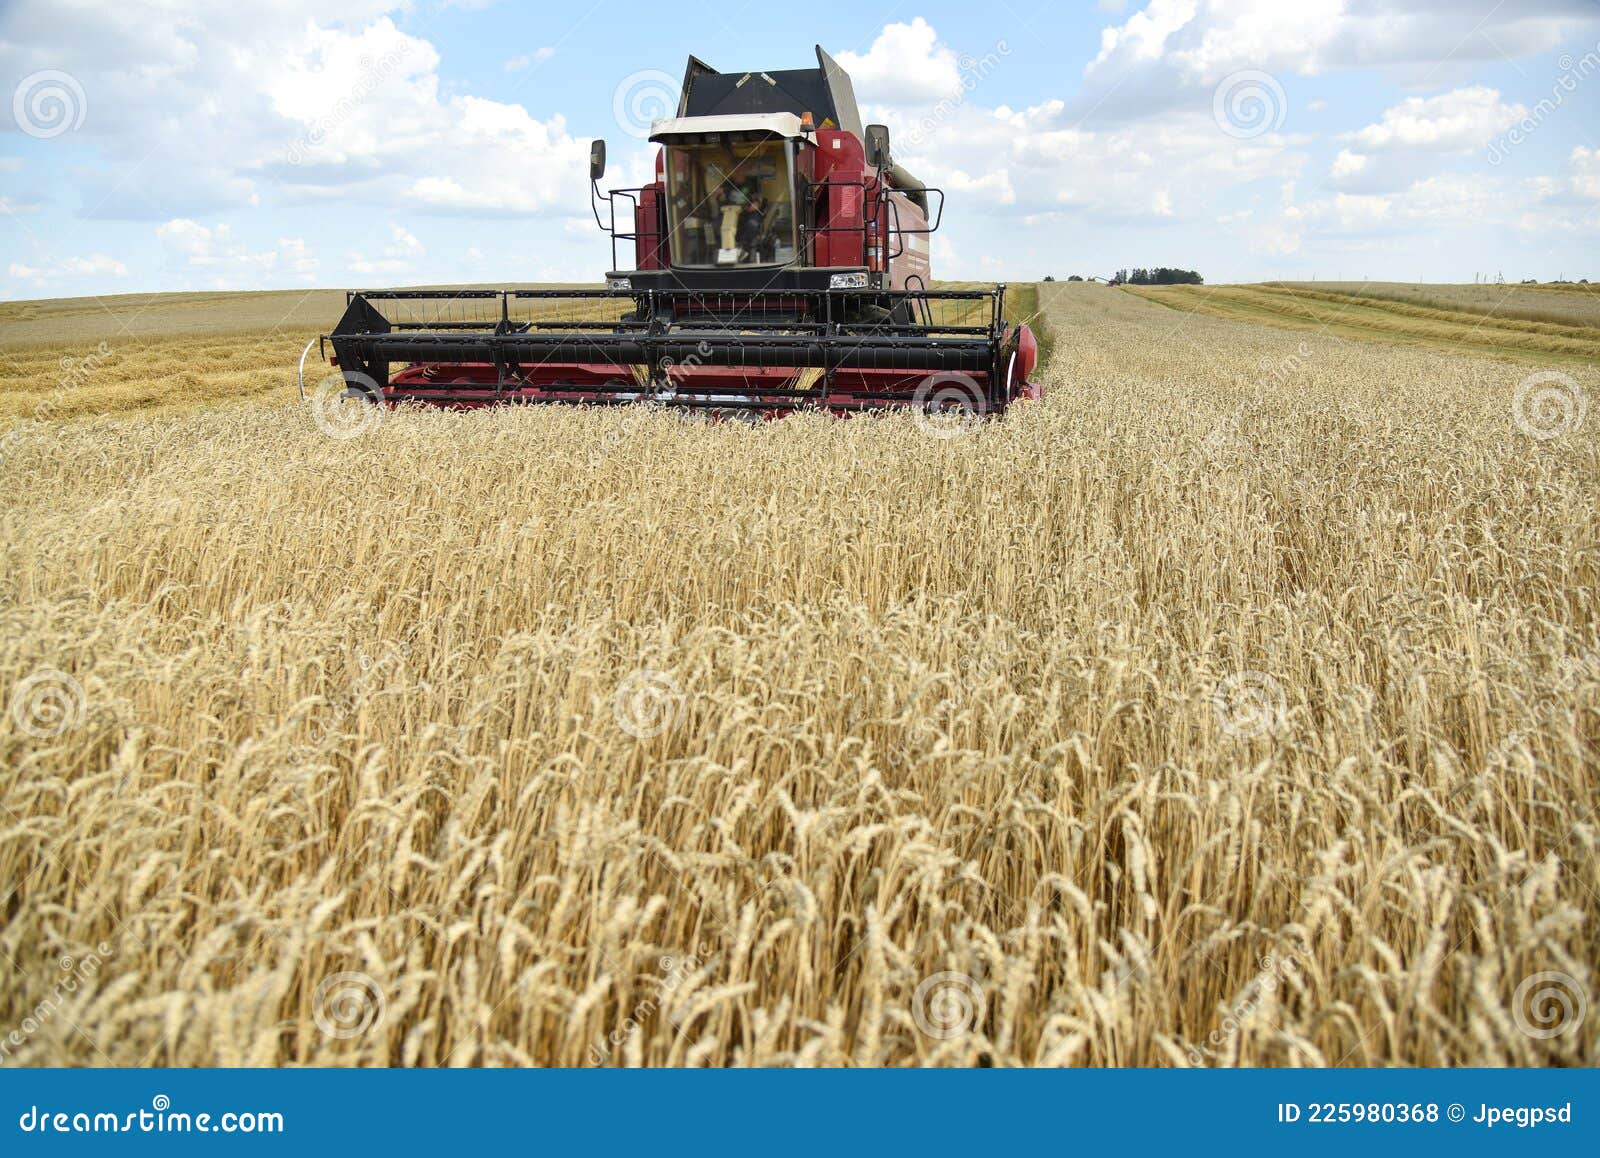 how does a combine work for wheat